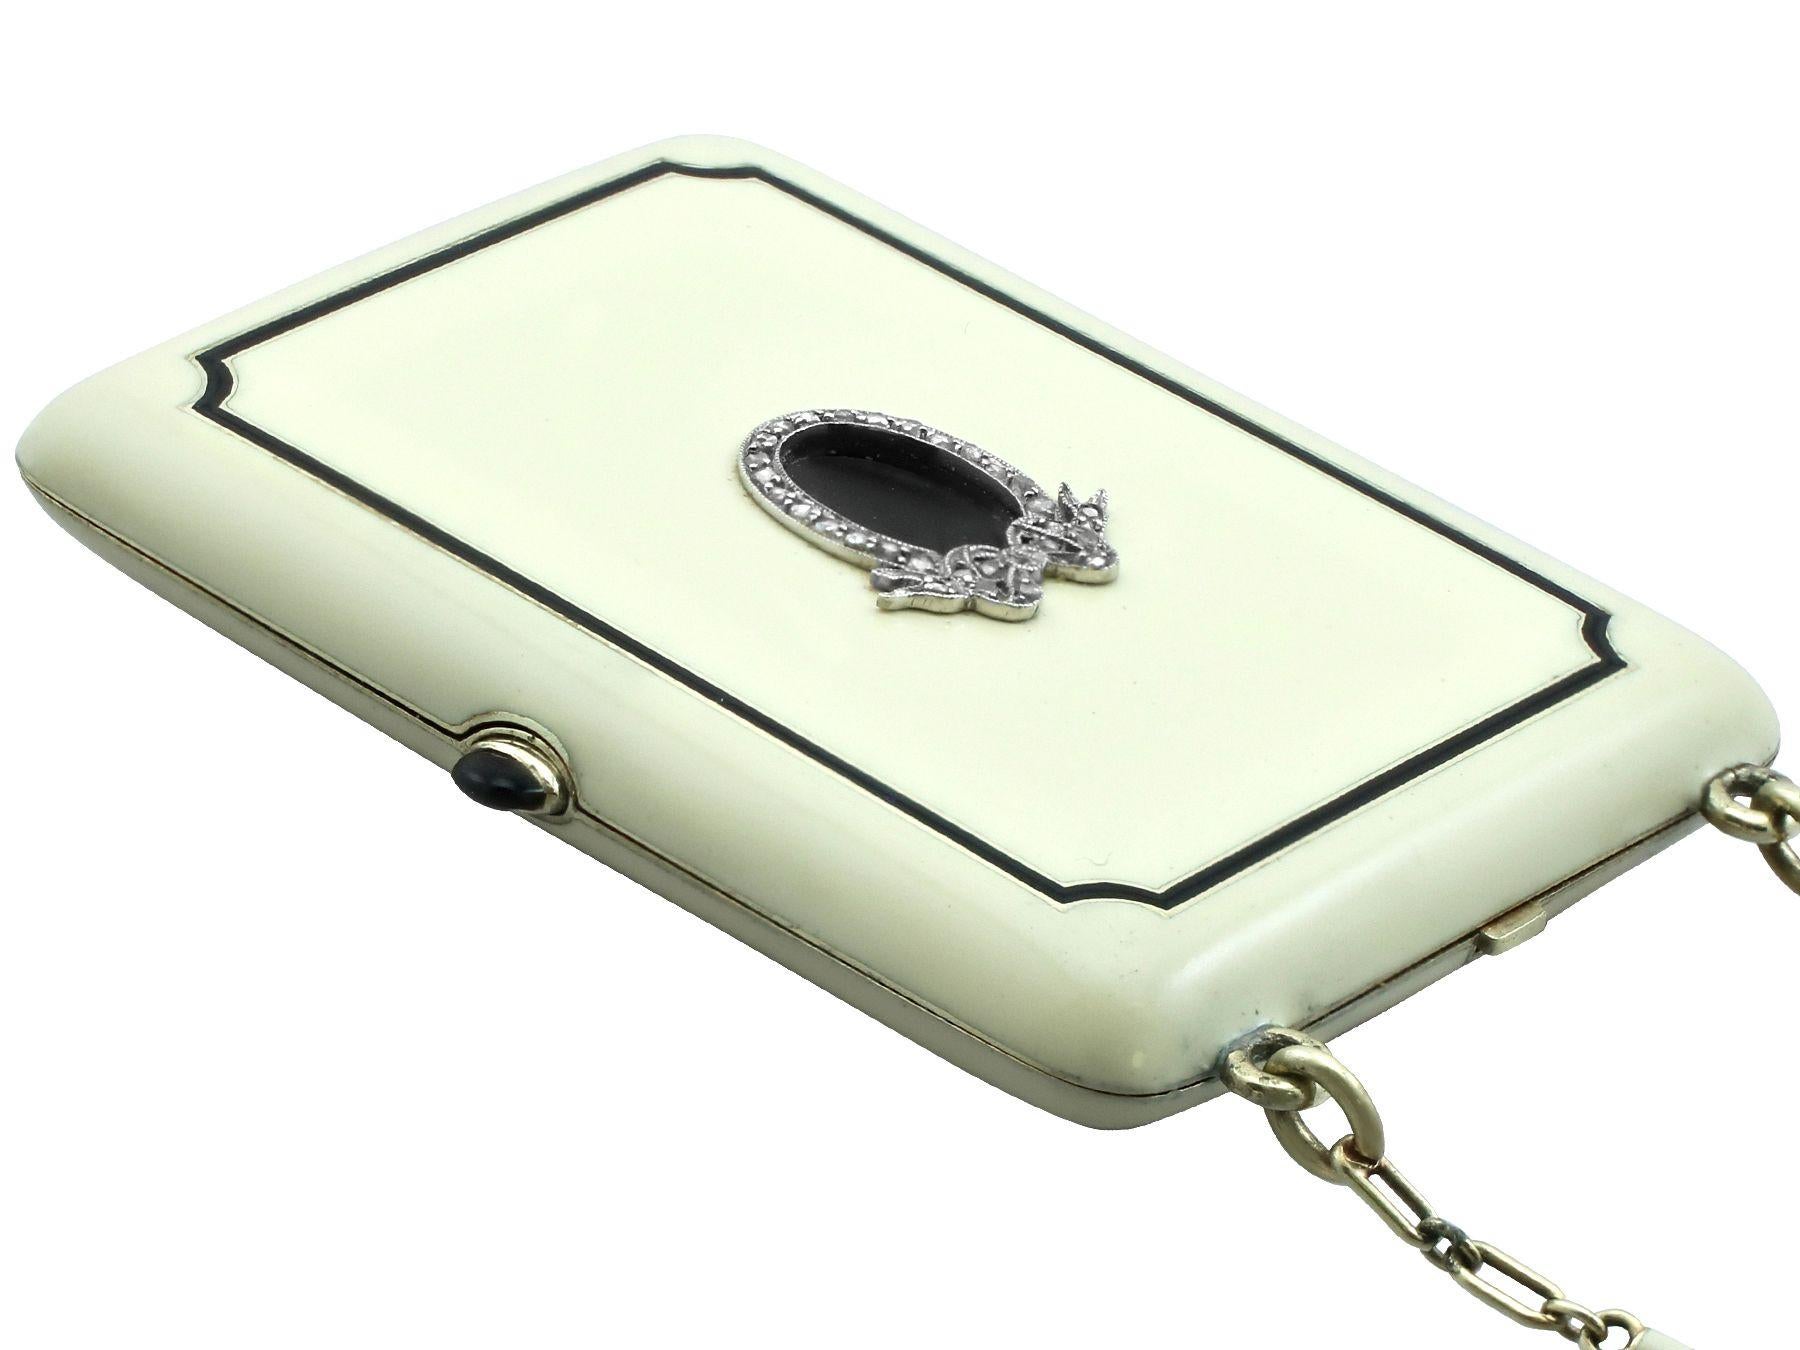 Tiffany & Co. 14 Carat Yellow Gold, Enamel and Diamond Compact  For Sale 3